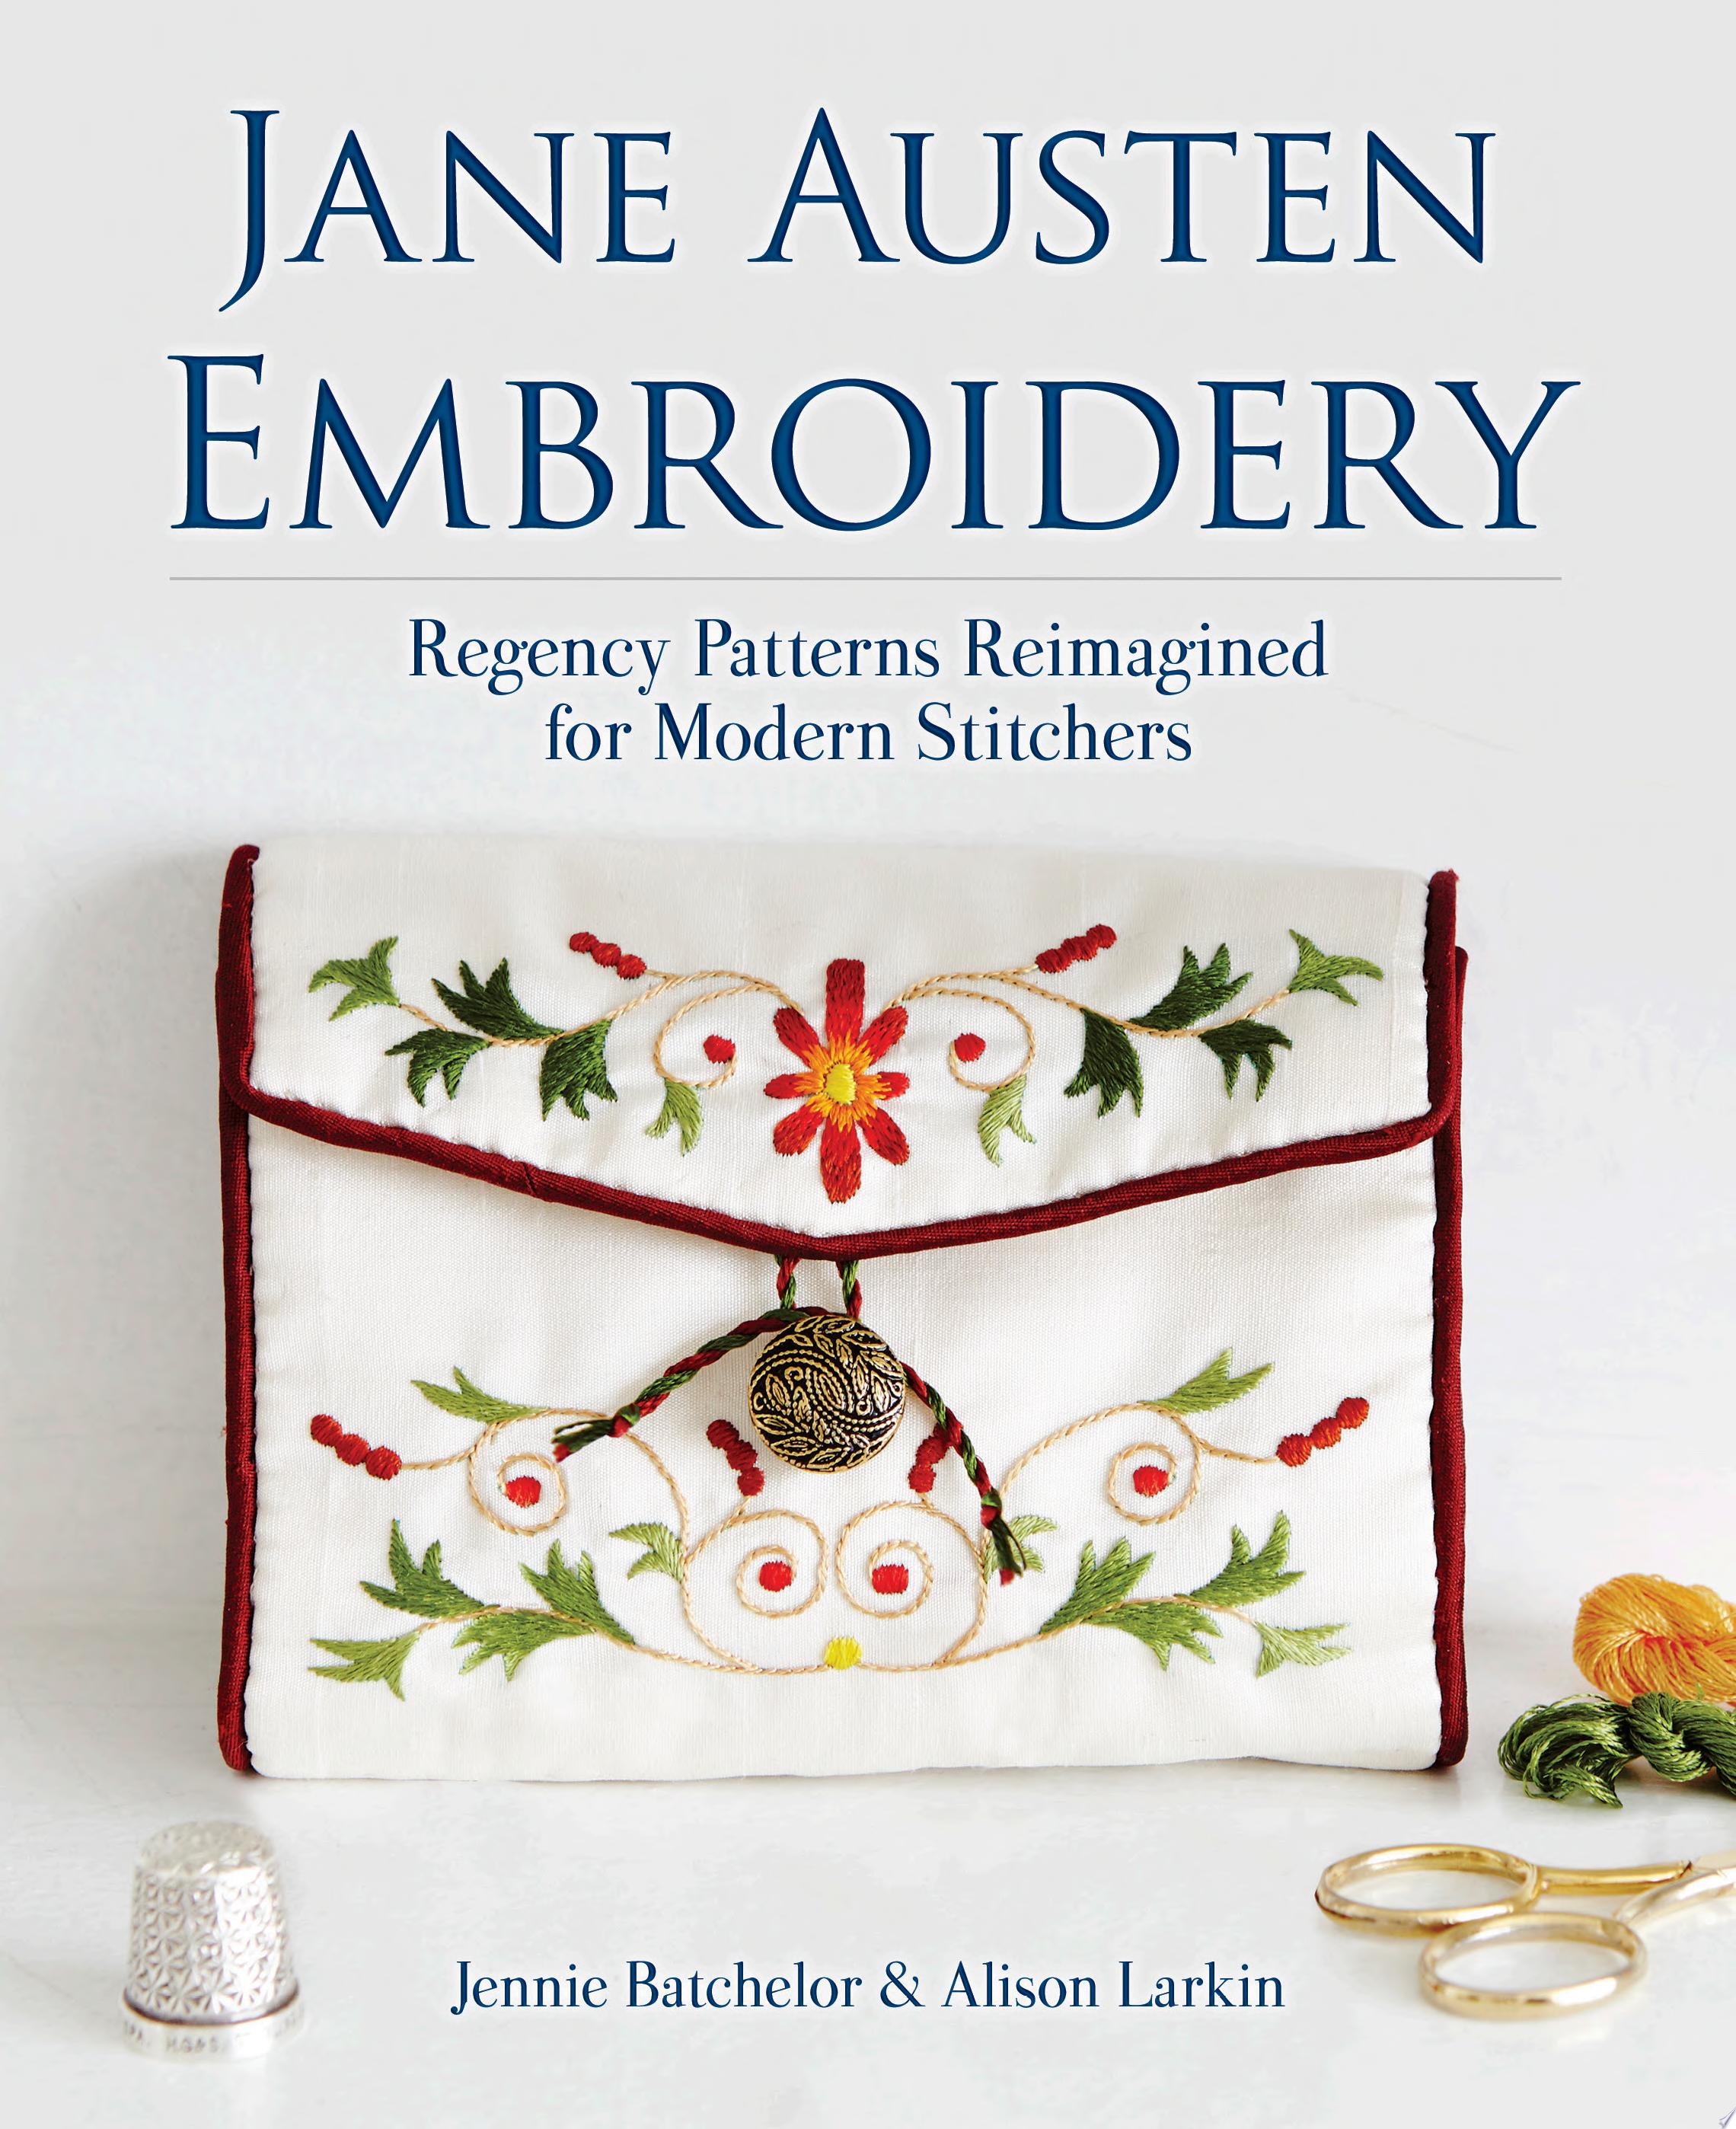 Image for "Jane Austen Embroidery"